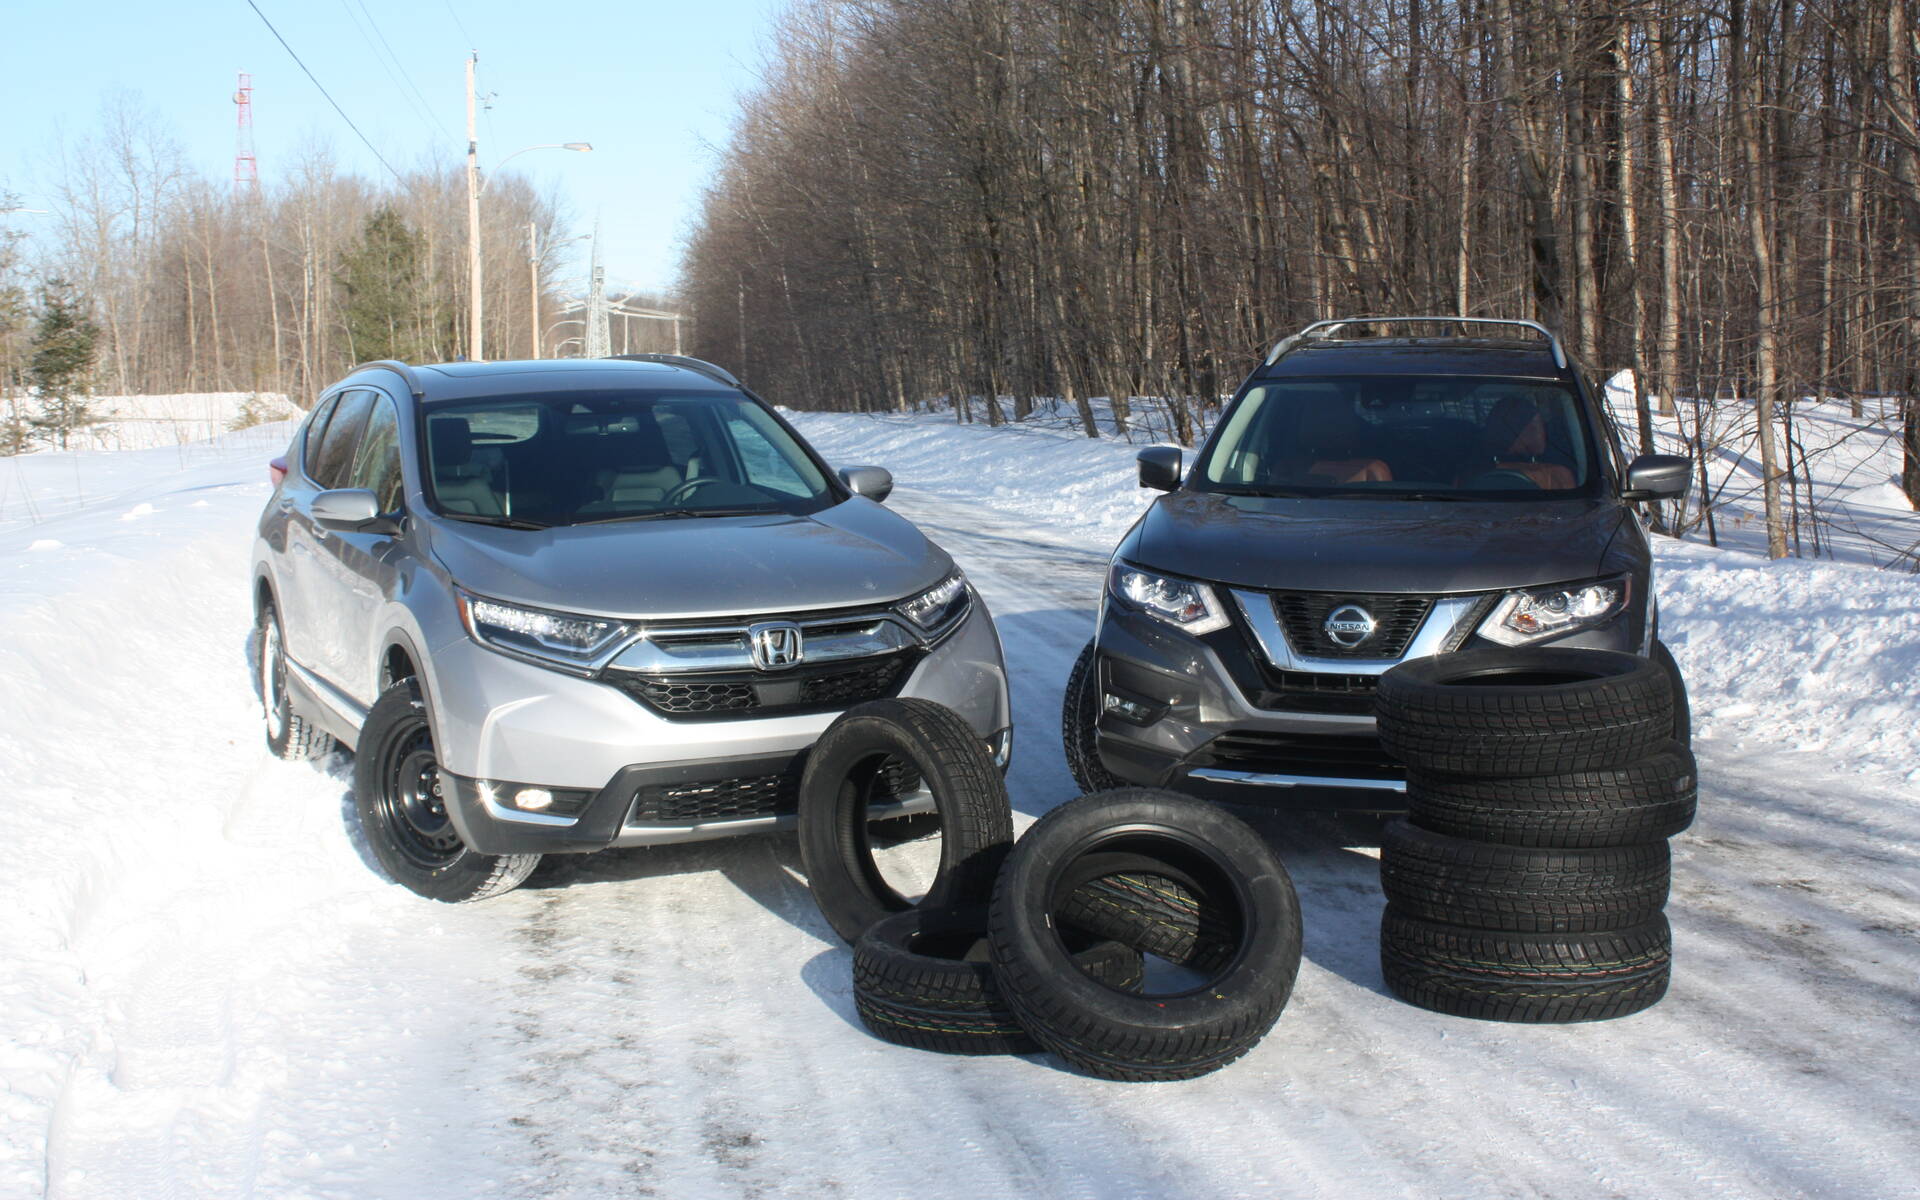 Top 10: Best Winter Tires for Cars and Small SUVs, 2021-2022 - The Car Guide